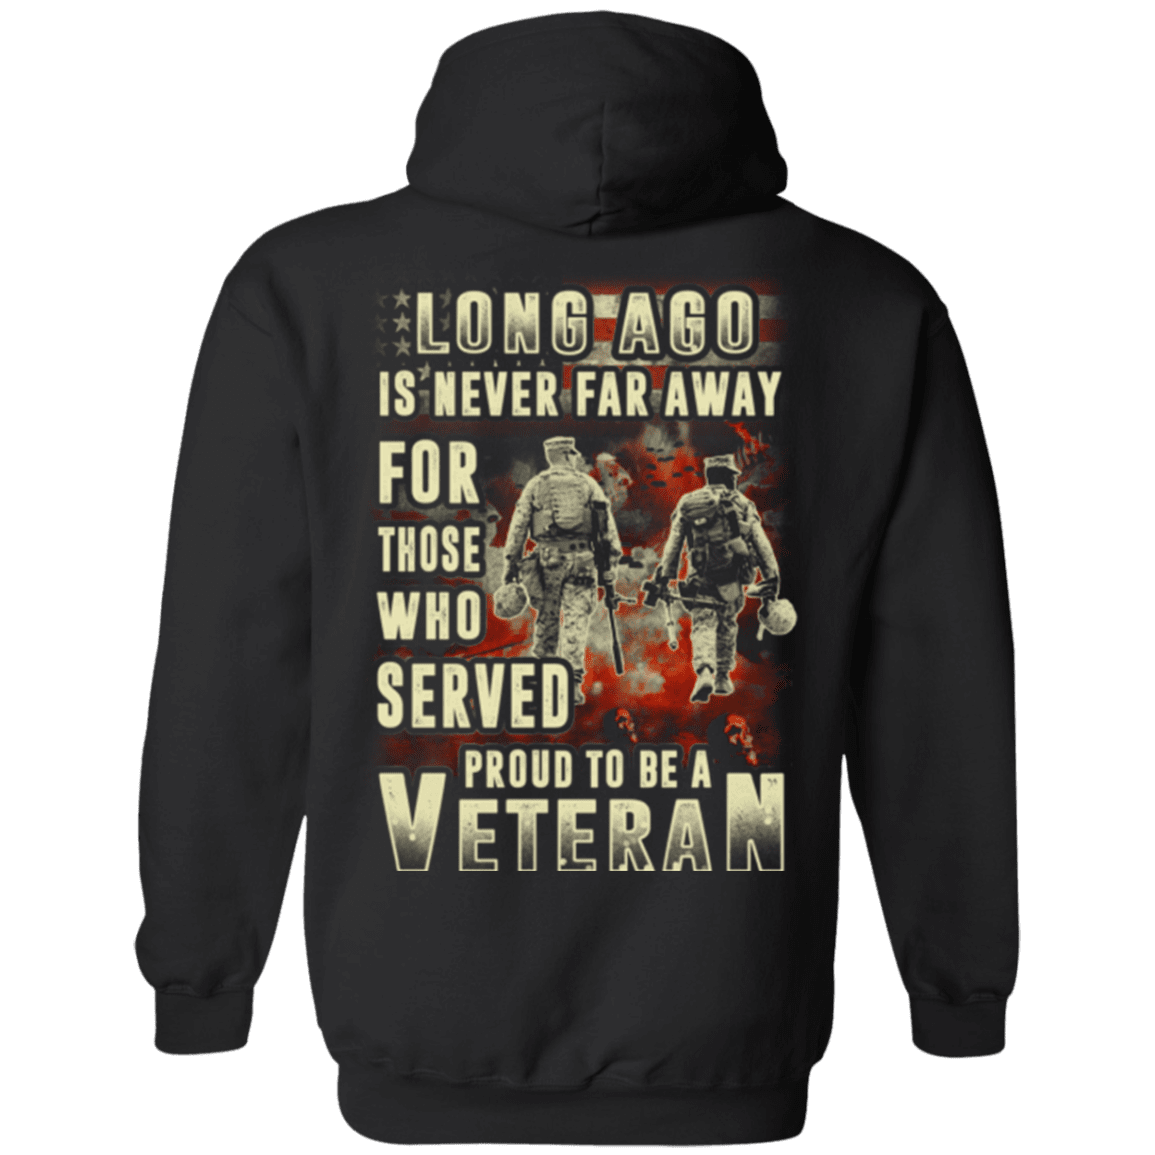 Military T-Shirt "Long Ago Is Never Far Away For Those Who Served Veteran"-TShirt-General-Veterans Nation